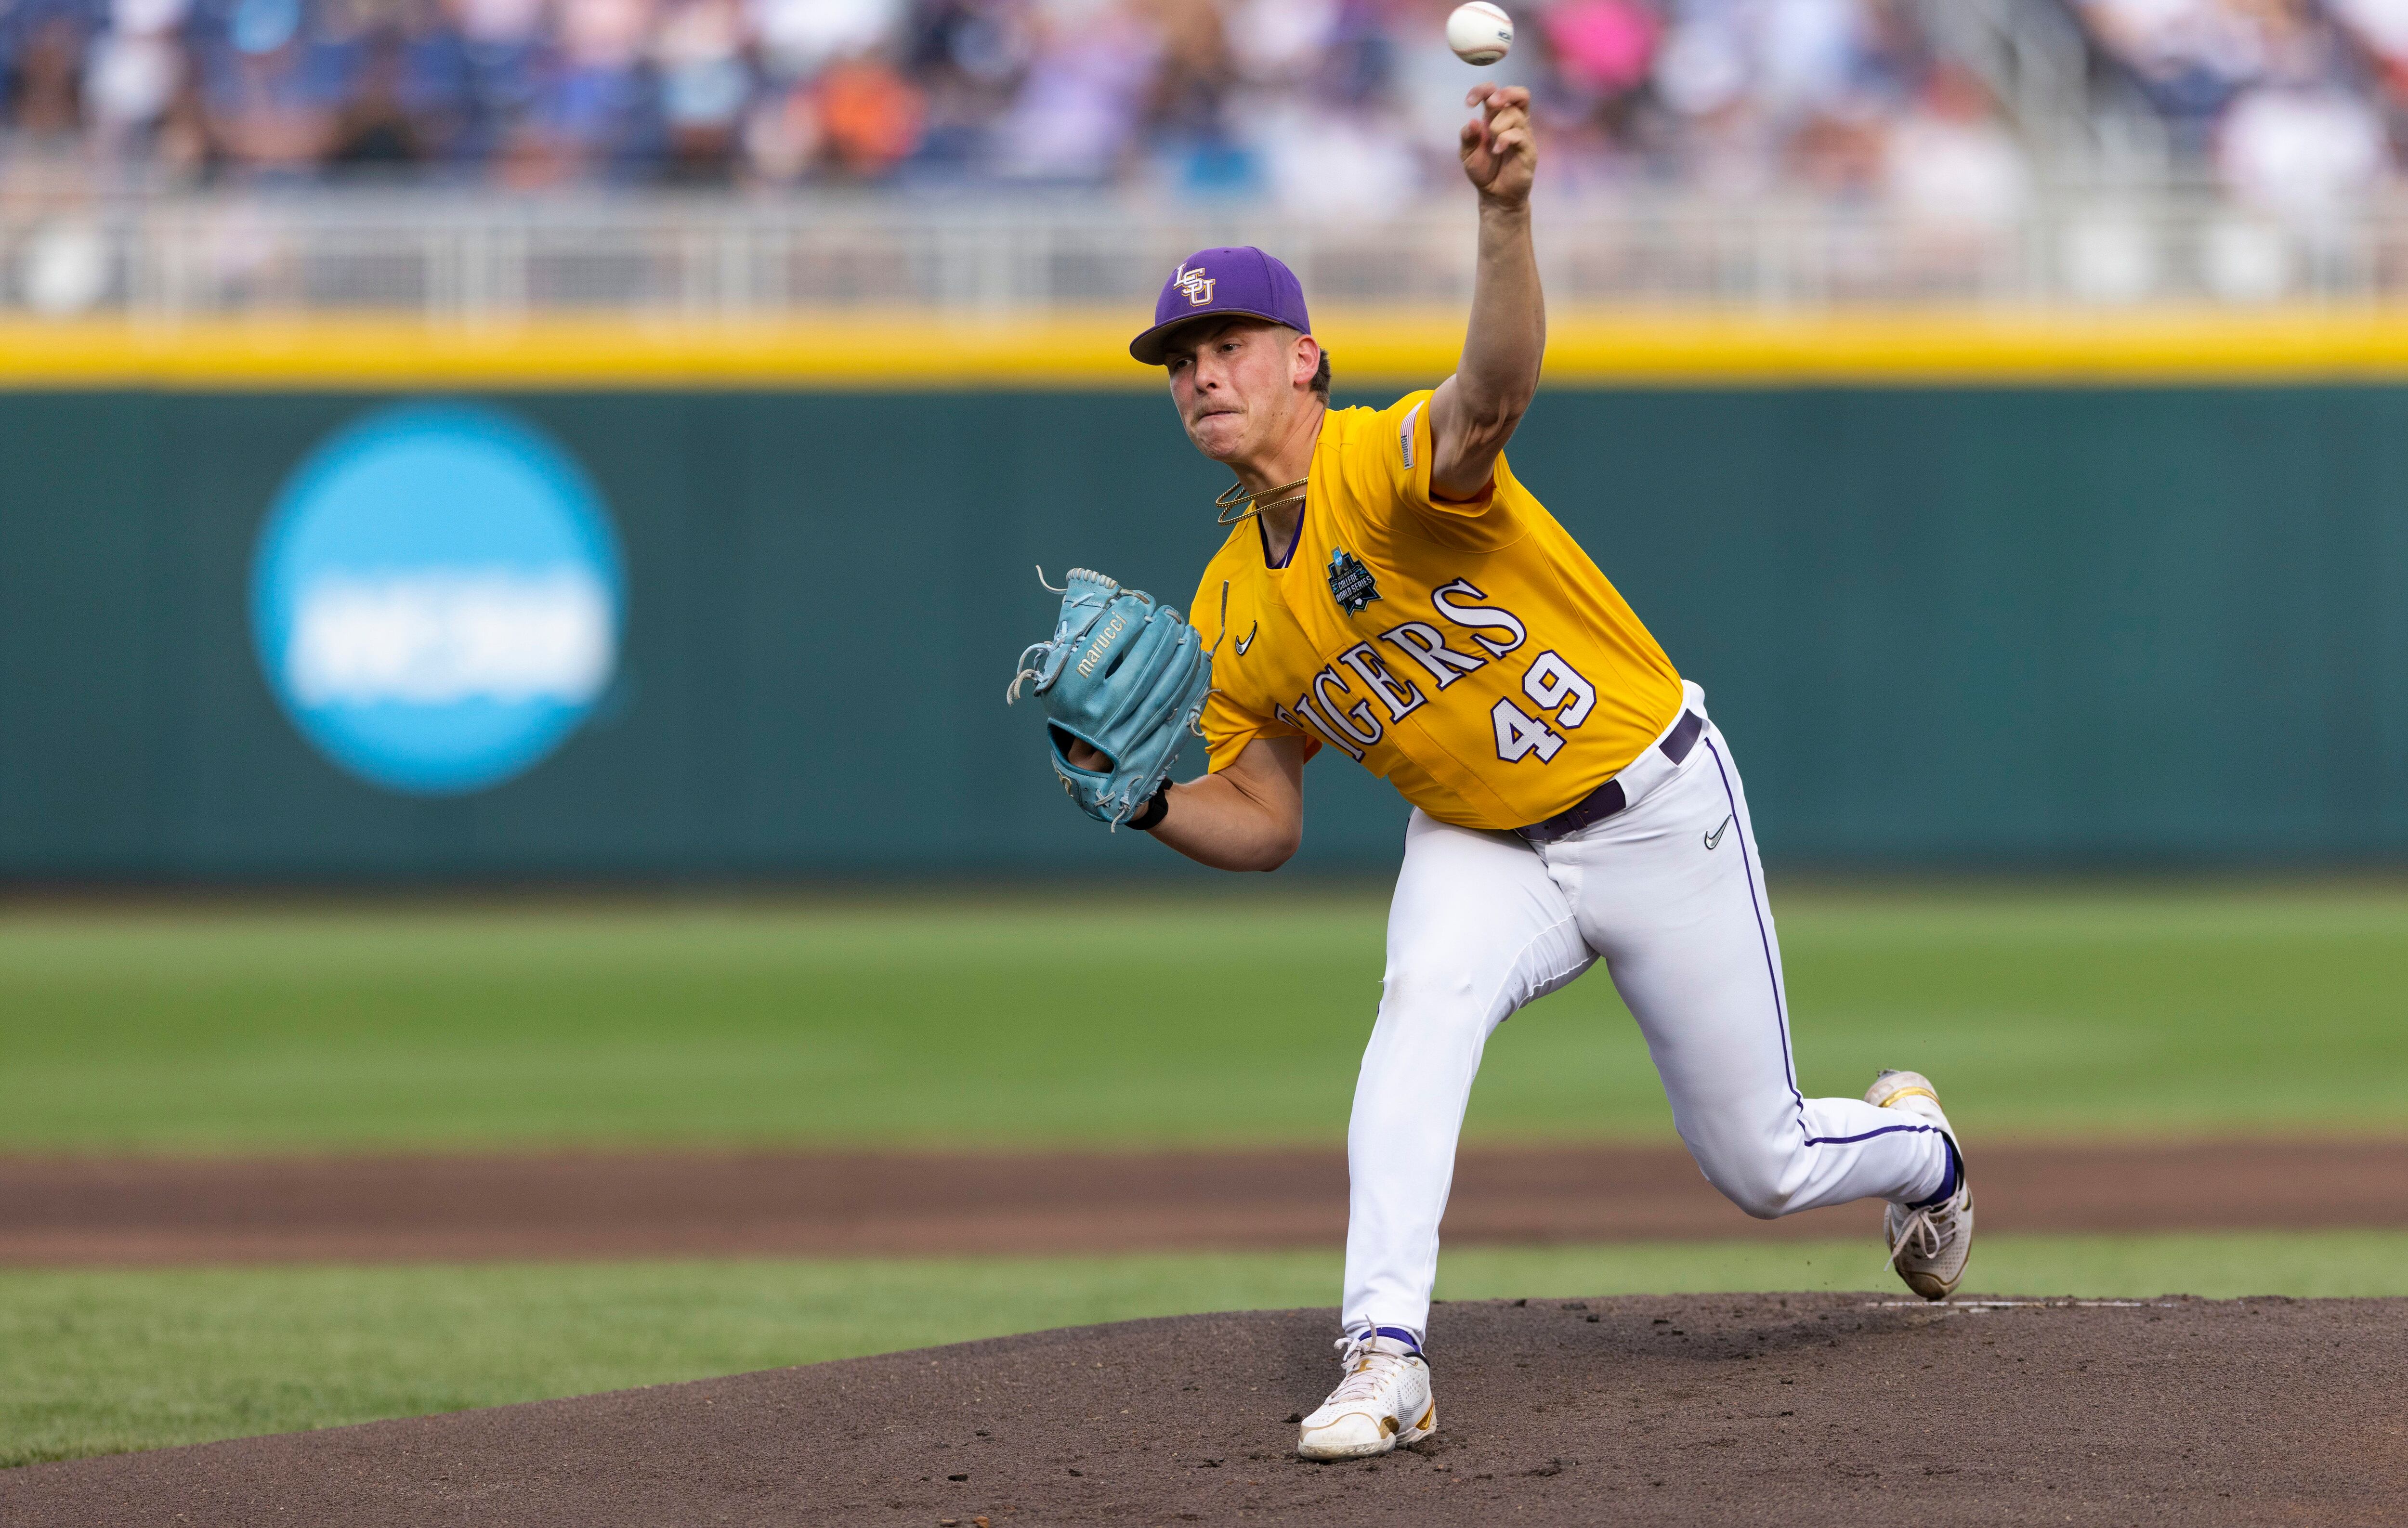 LSU Baseball on X: End 1  Dylan ties it up for the Tigers. ARK